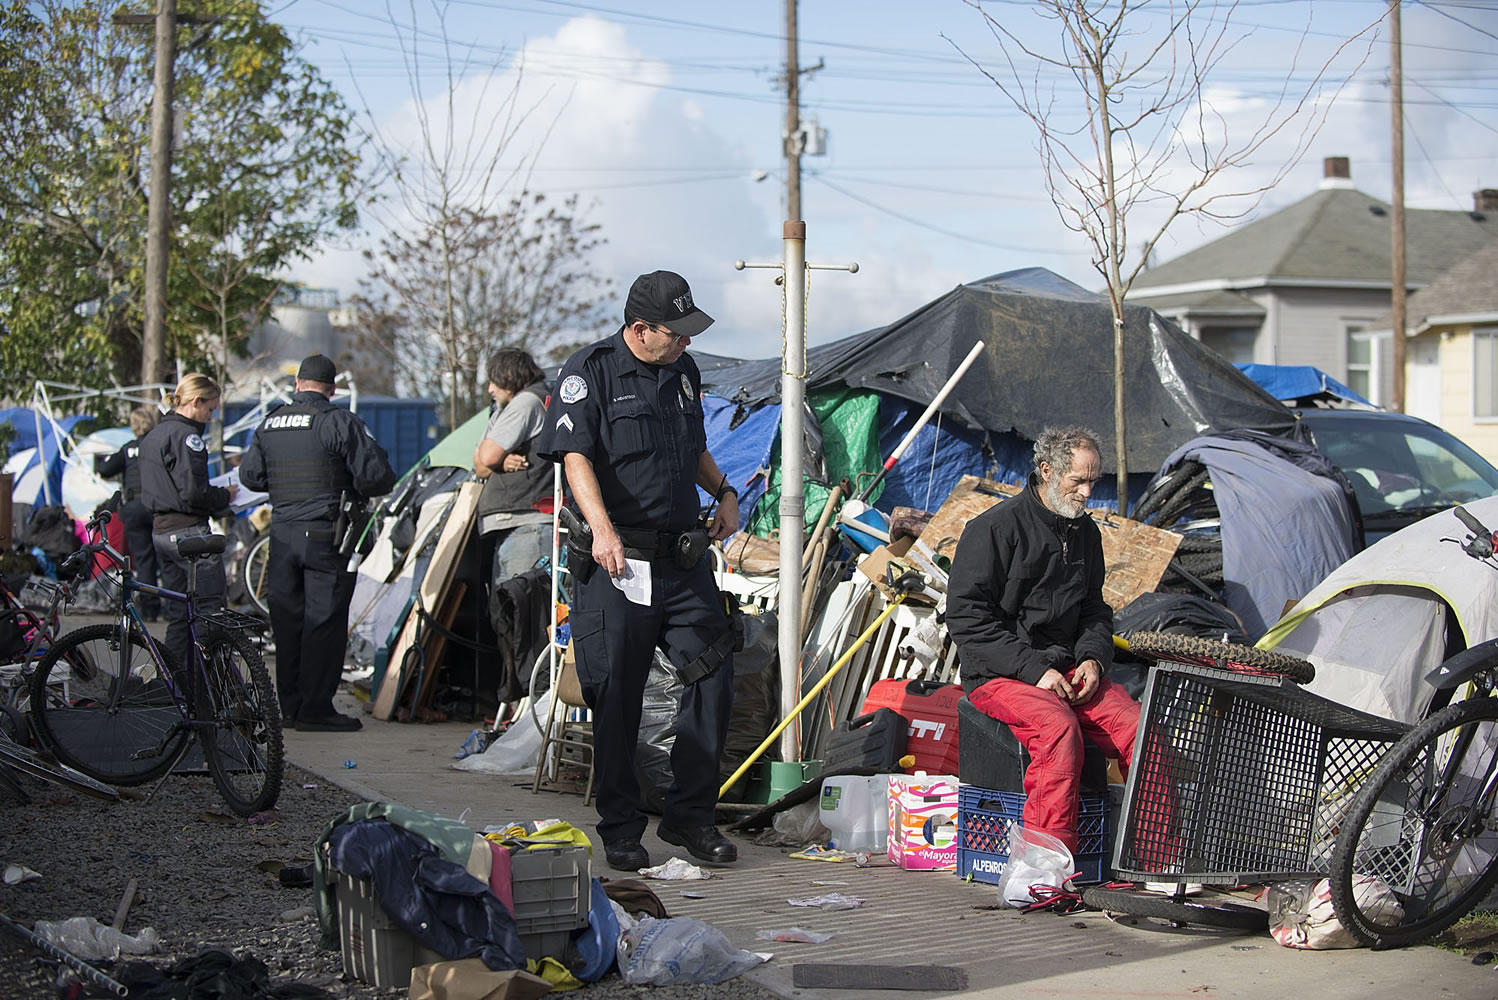 Police Cpl. Stuart Hemstock, center, and other officers work with homeless people Monday morning as they seek to enforce the city's camping law.